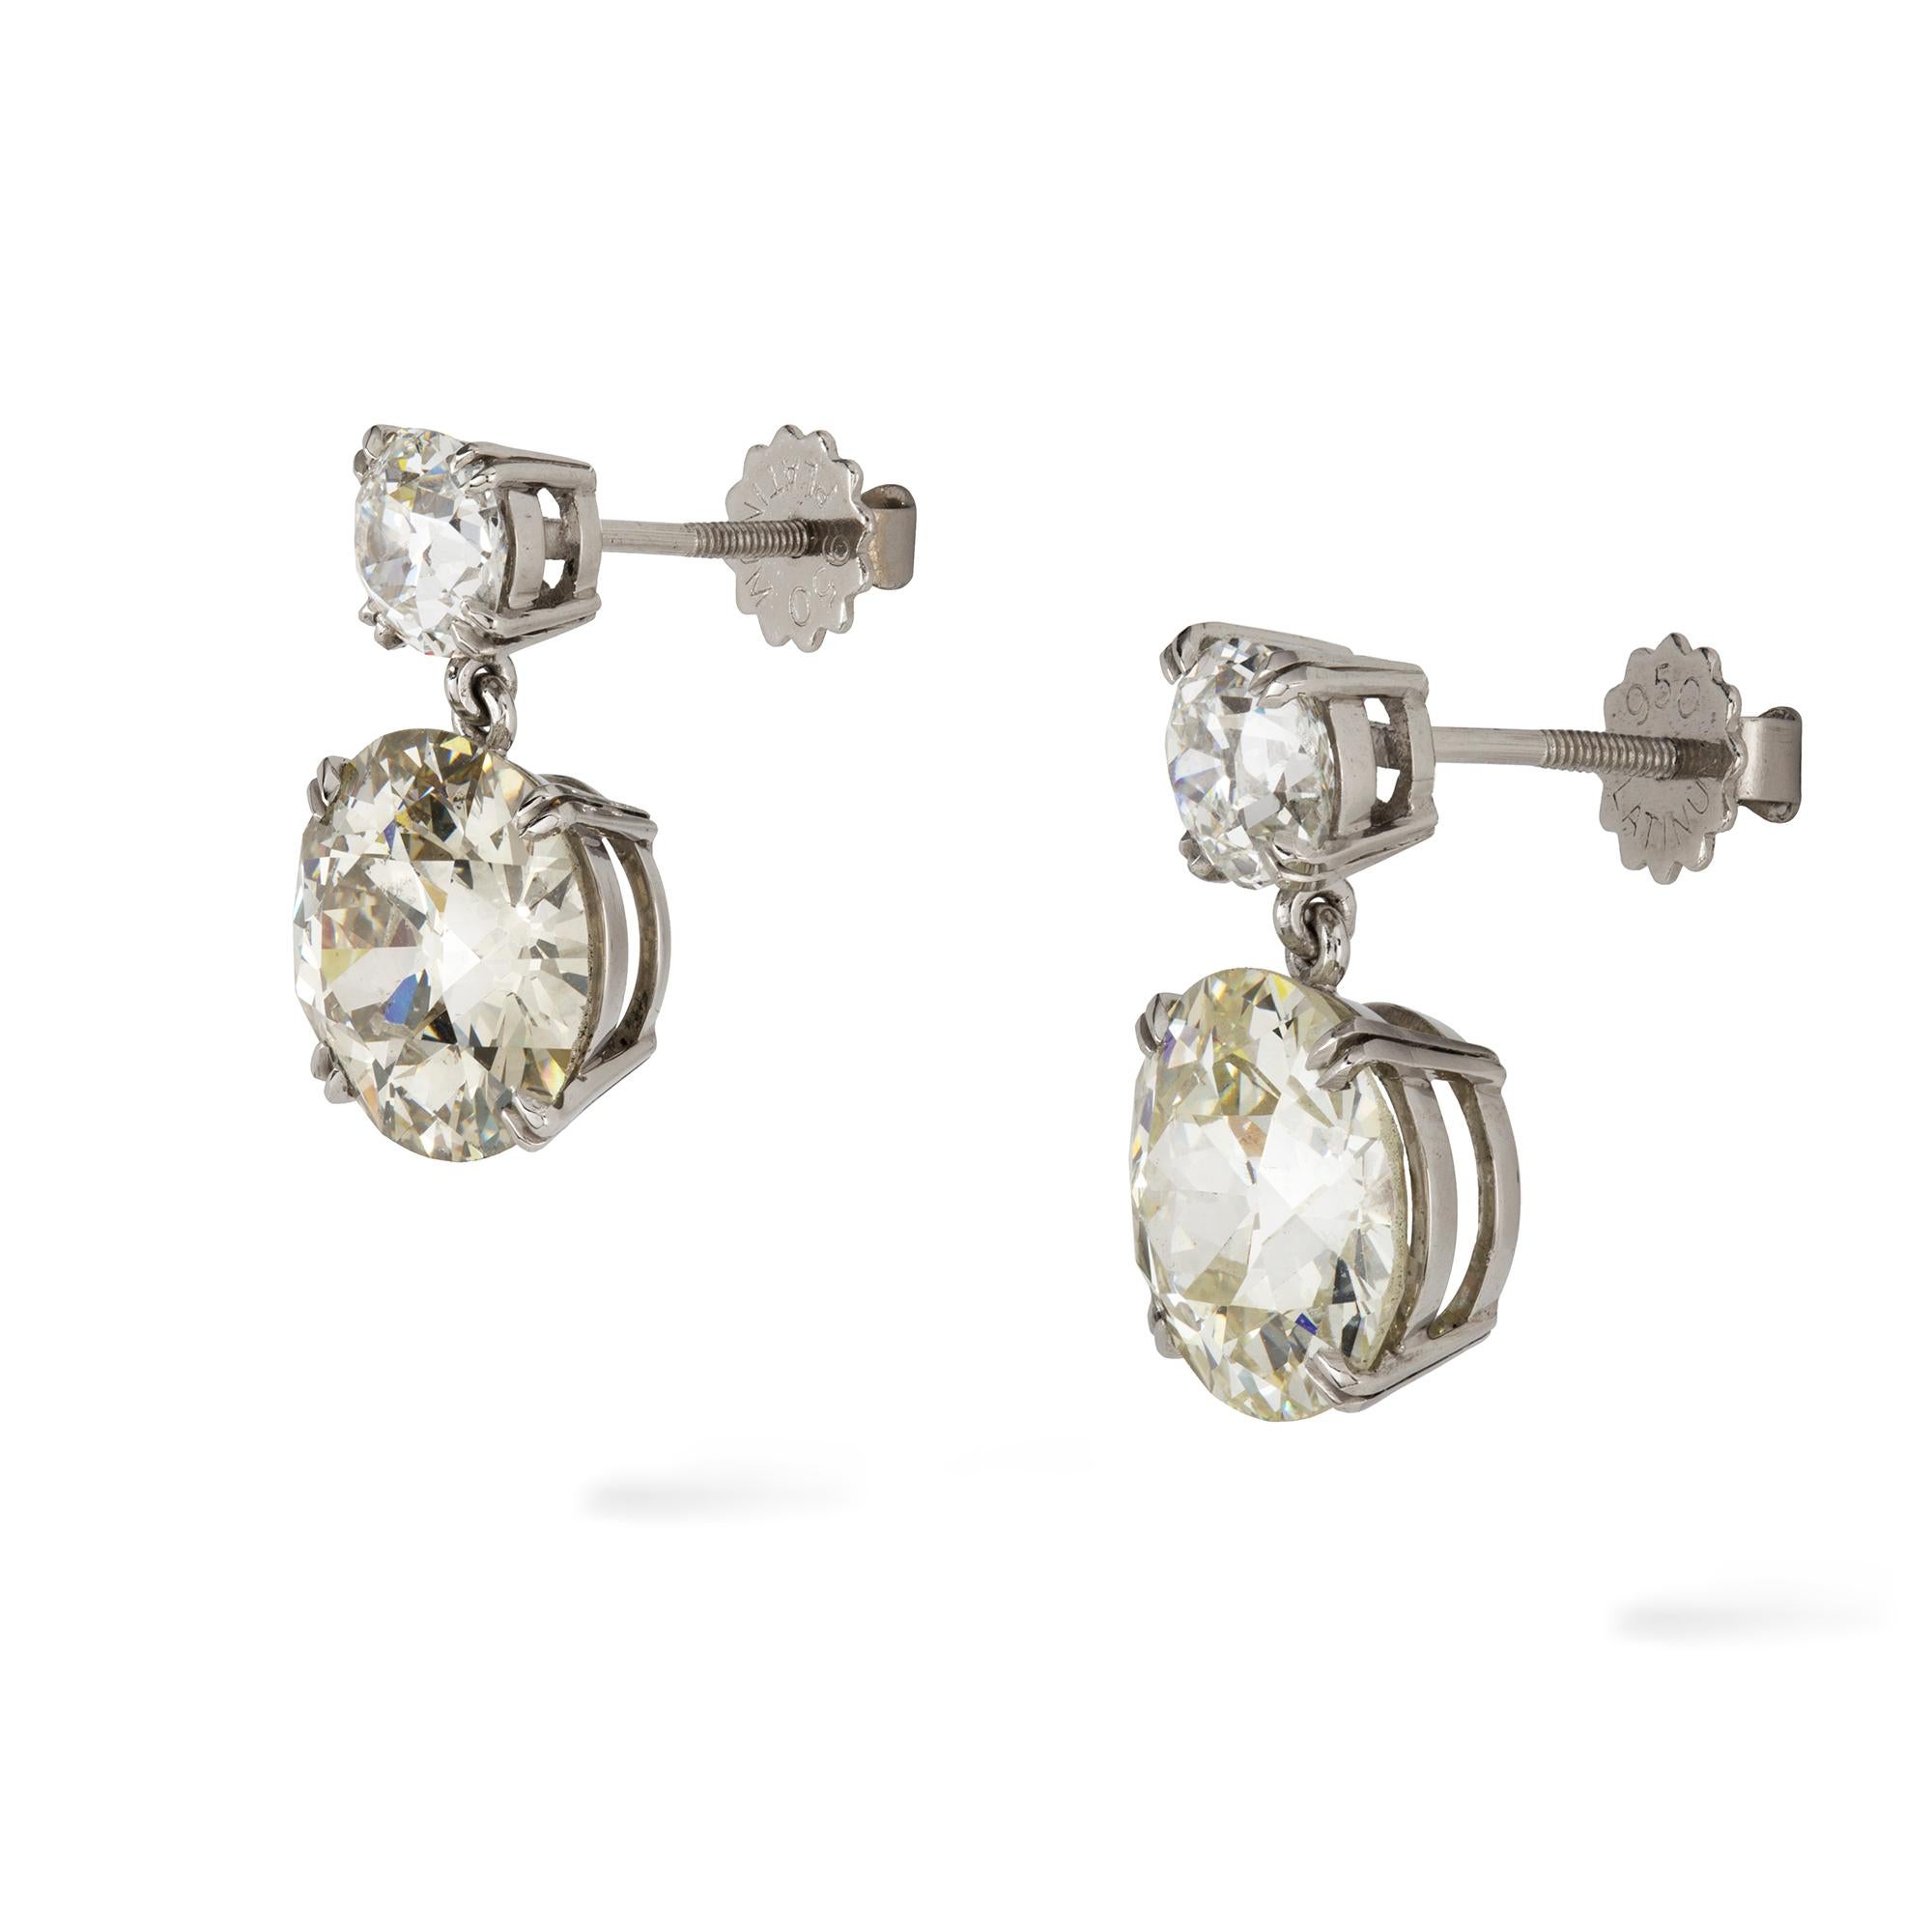 A pair of diamond drop earrings, the two round shape old-cut diamonds, weighing 4.26 carats of M colour and P1 clarity and 4.85 carats of L colour and SI1 clarity, each suspended from a smaller old-cut diamond, weighing 0.91 and 0.86 carats, all